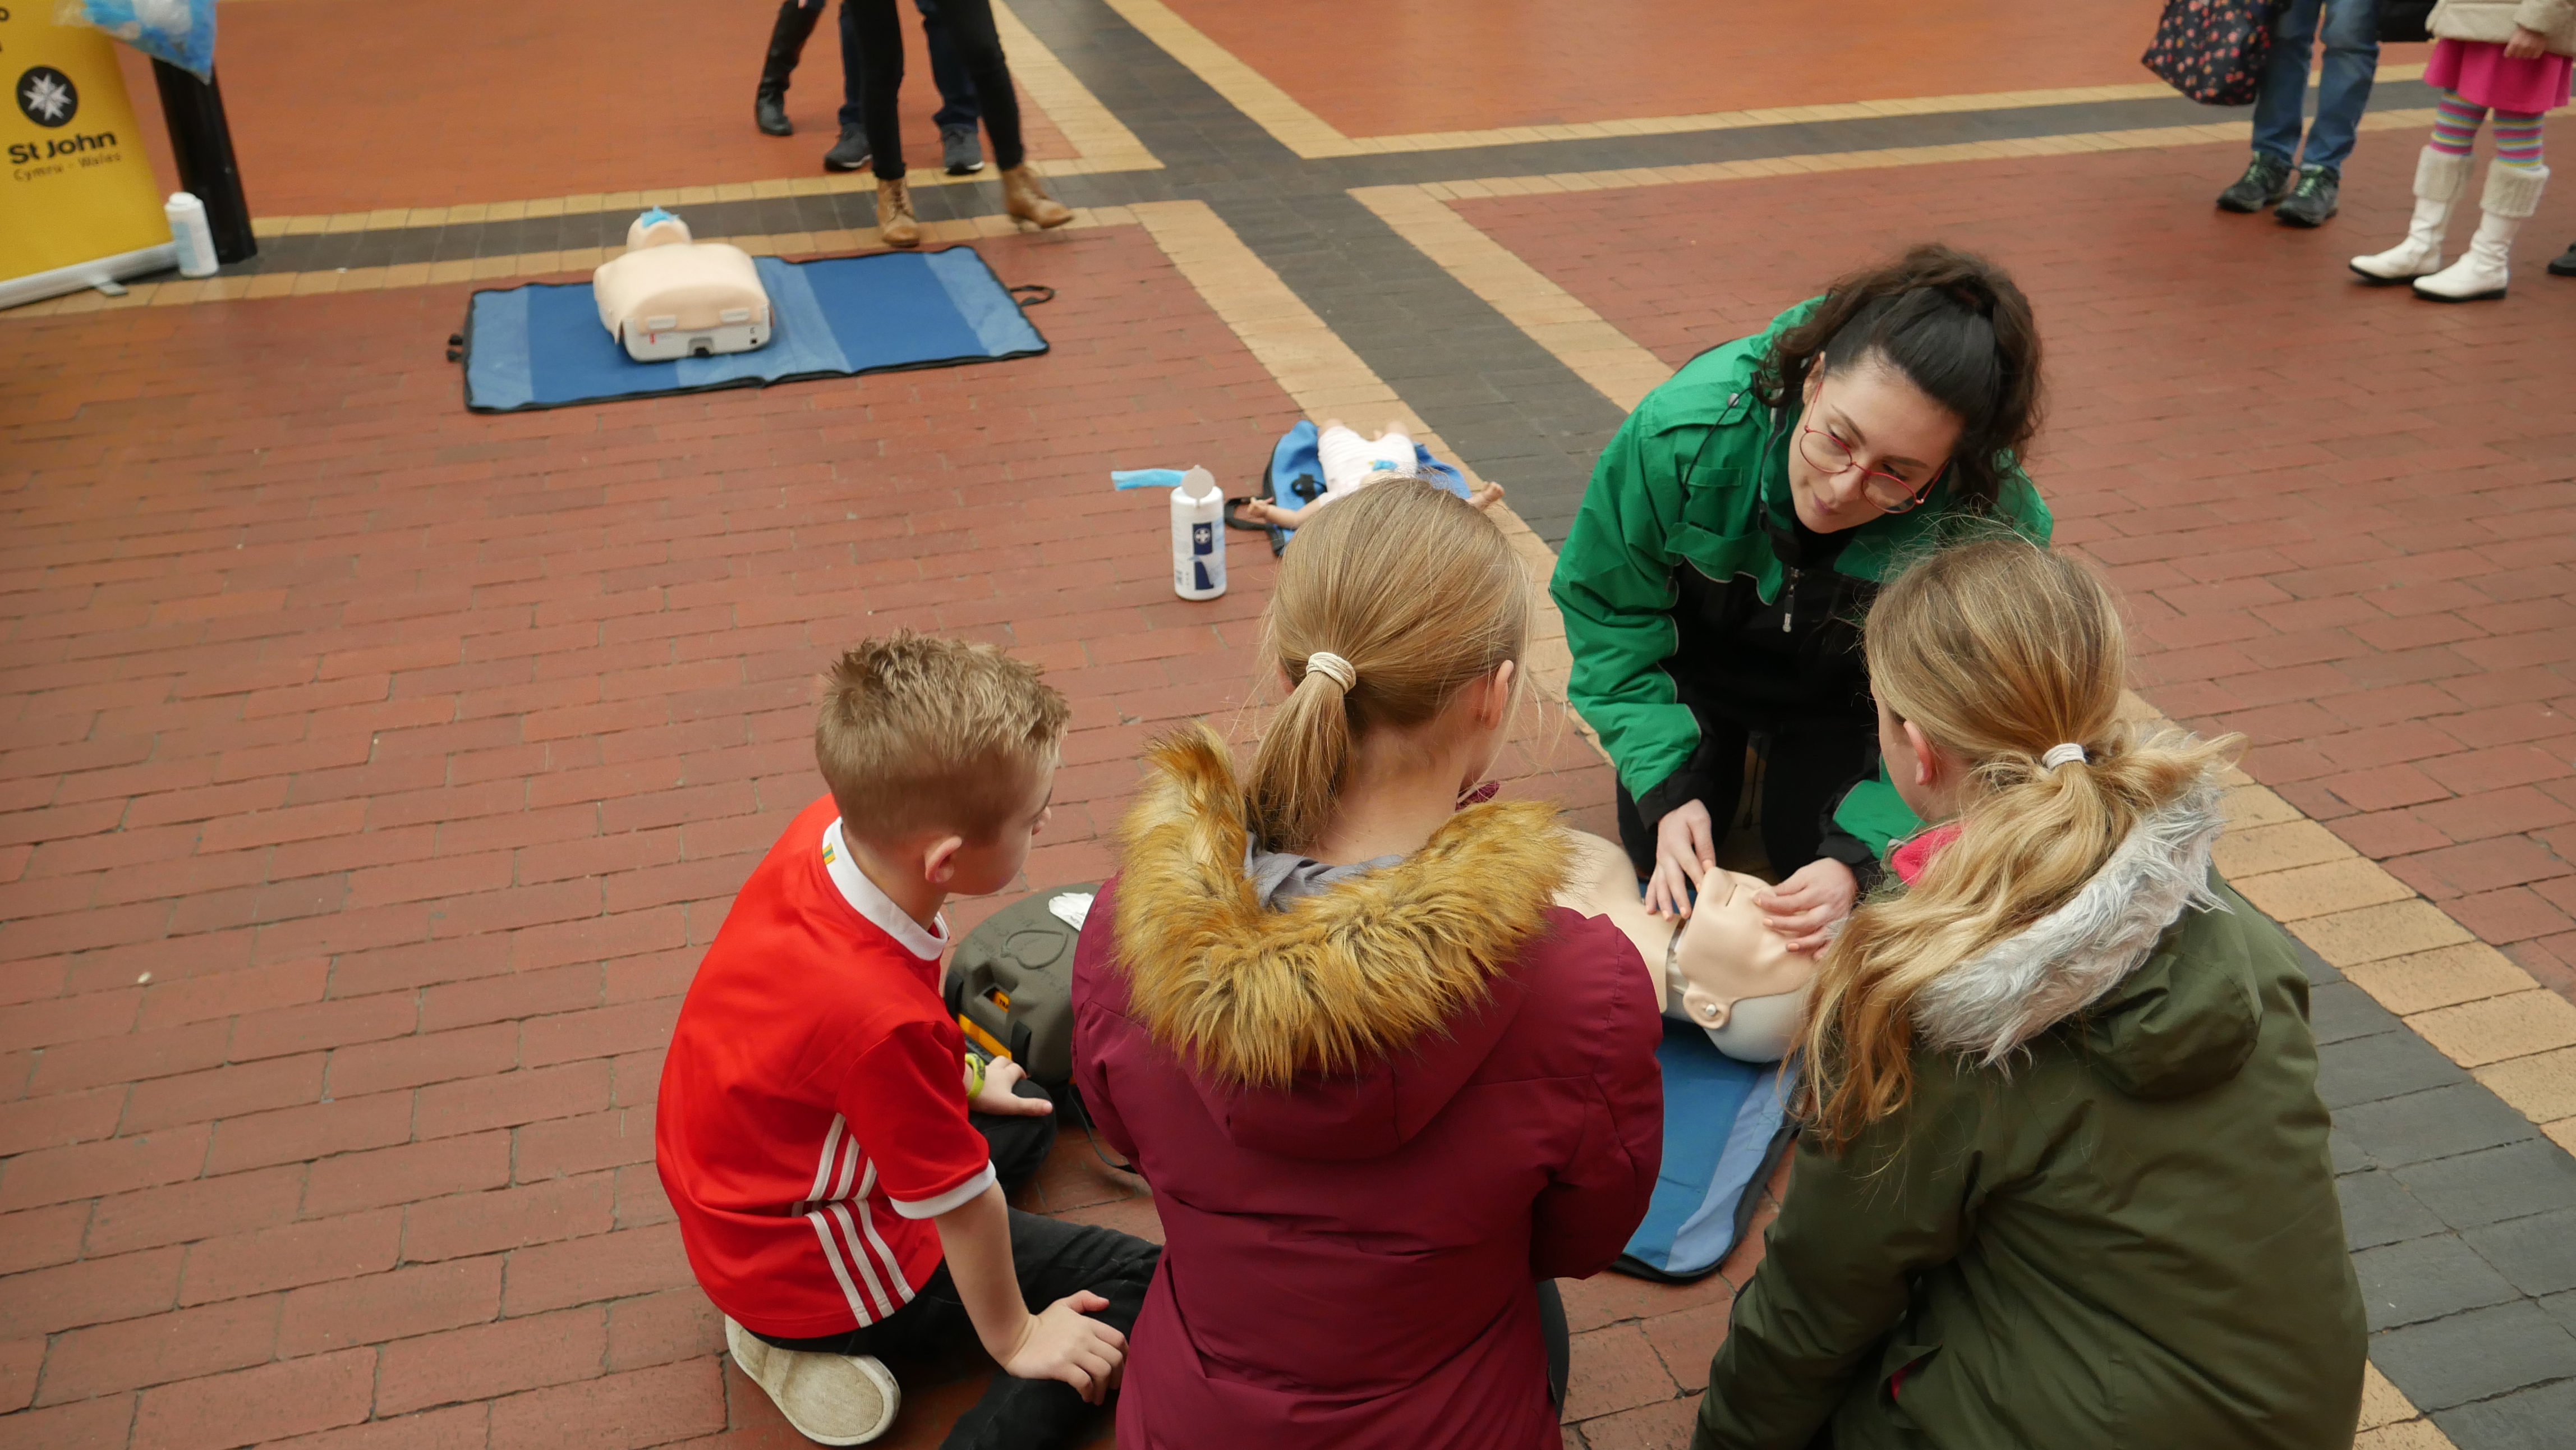 A woman shows three children how to use a defibrillator